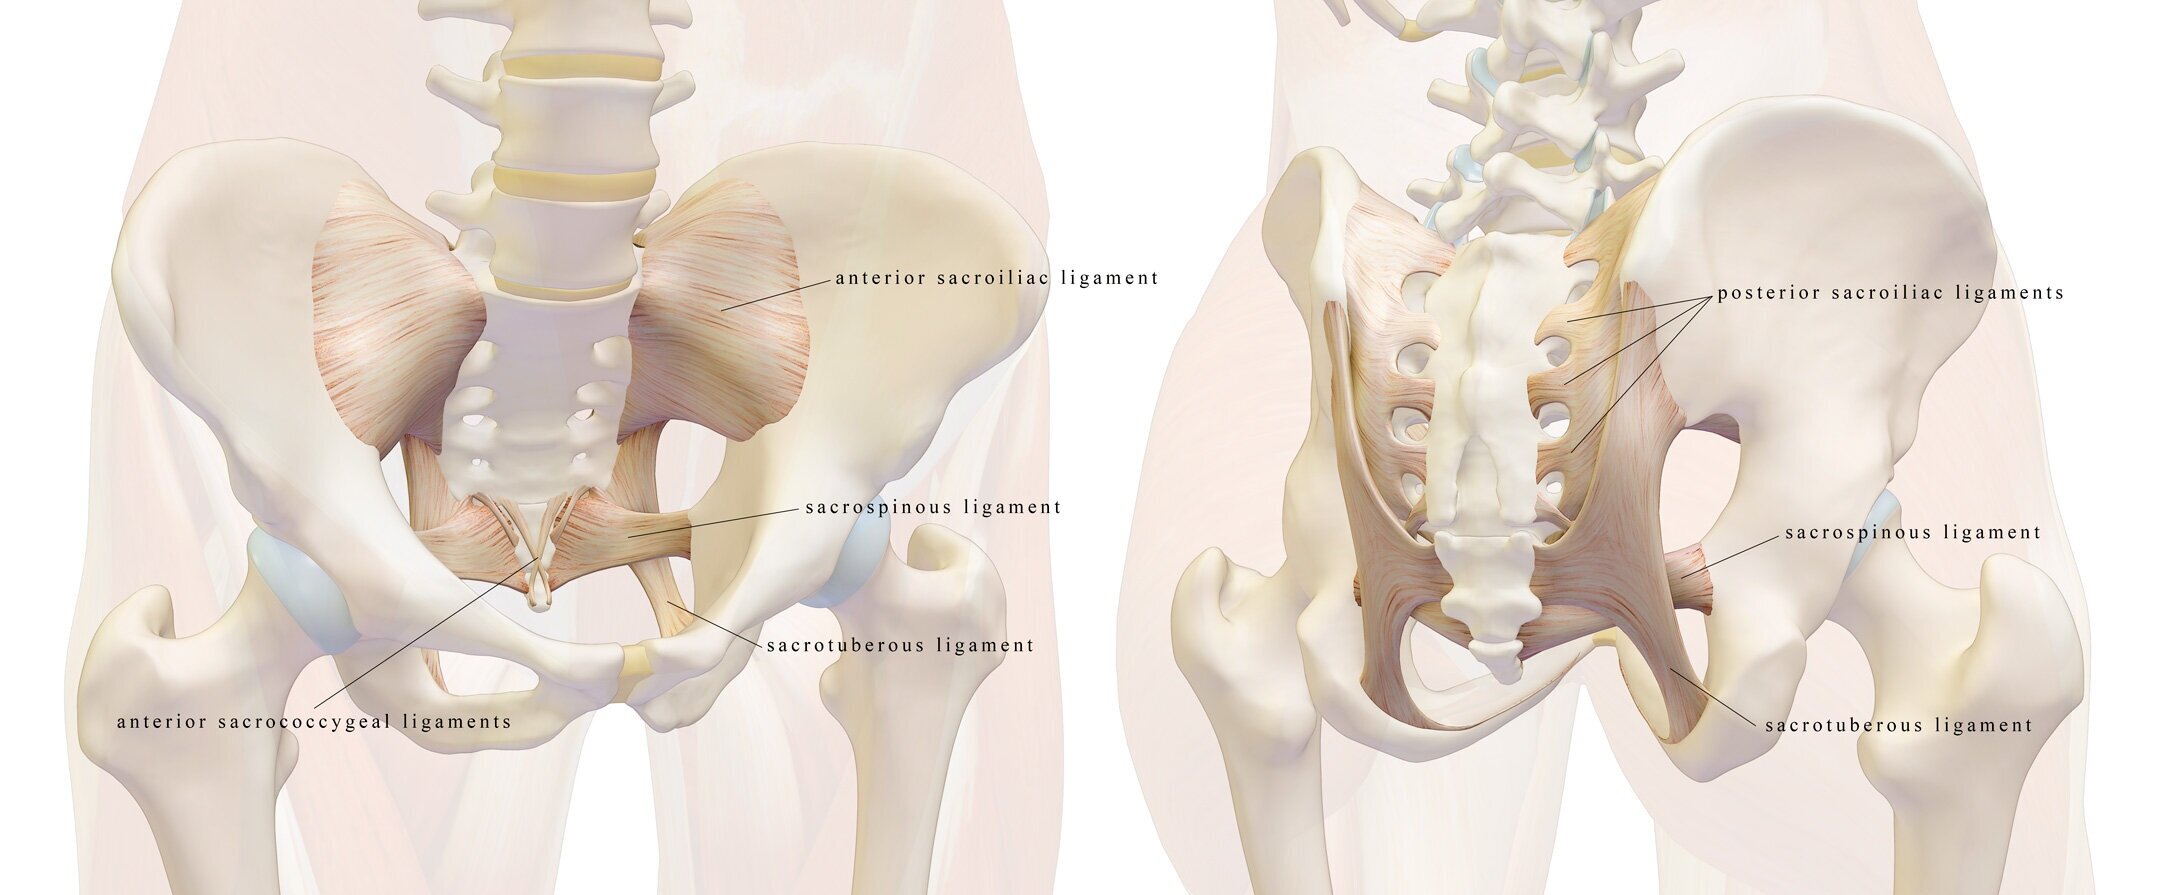 Reduce Low Back and Sacroiliac pain with these Toning Exercises